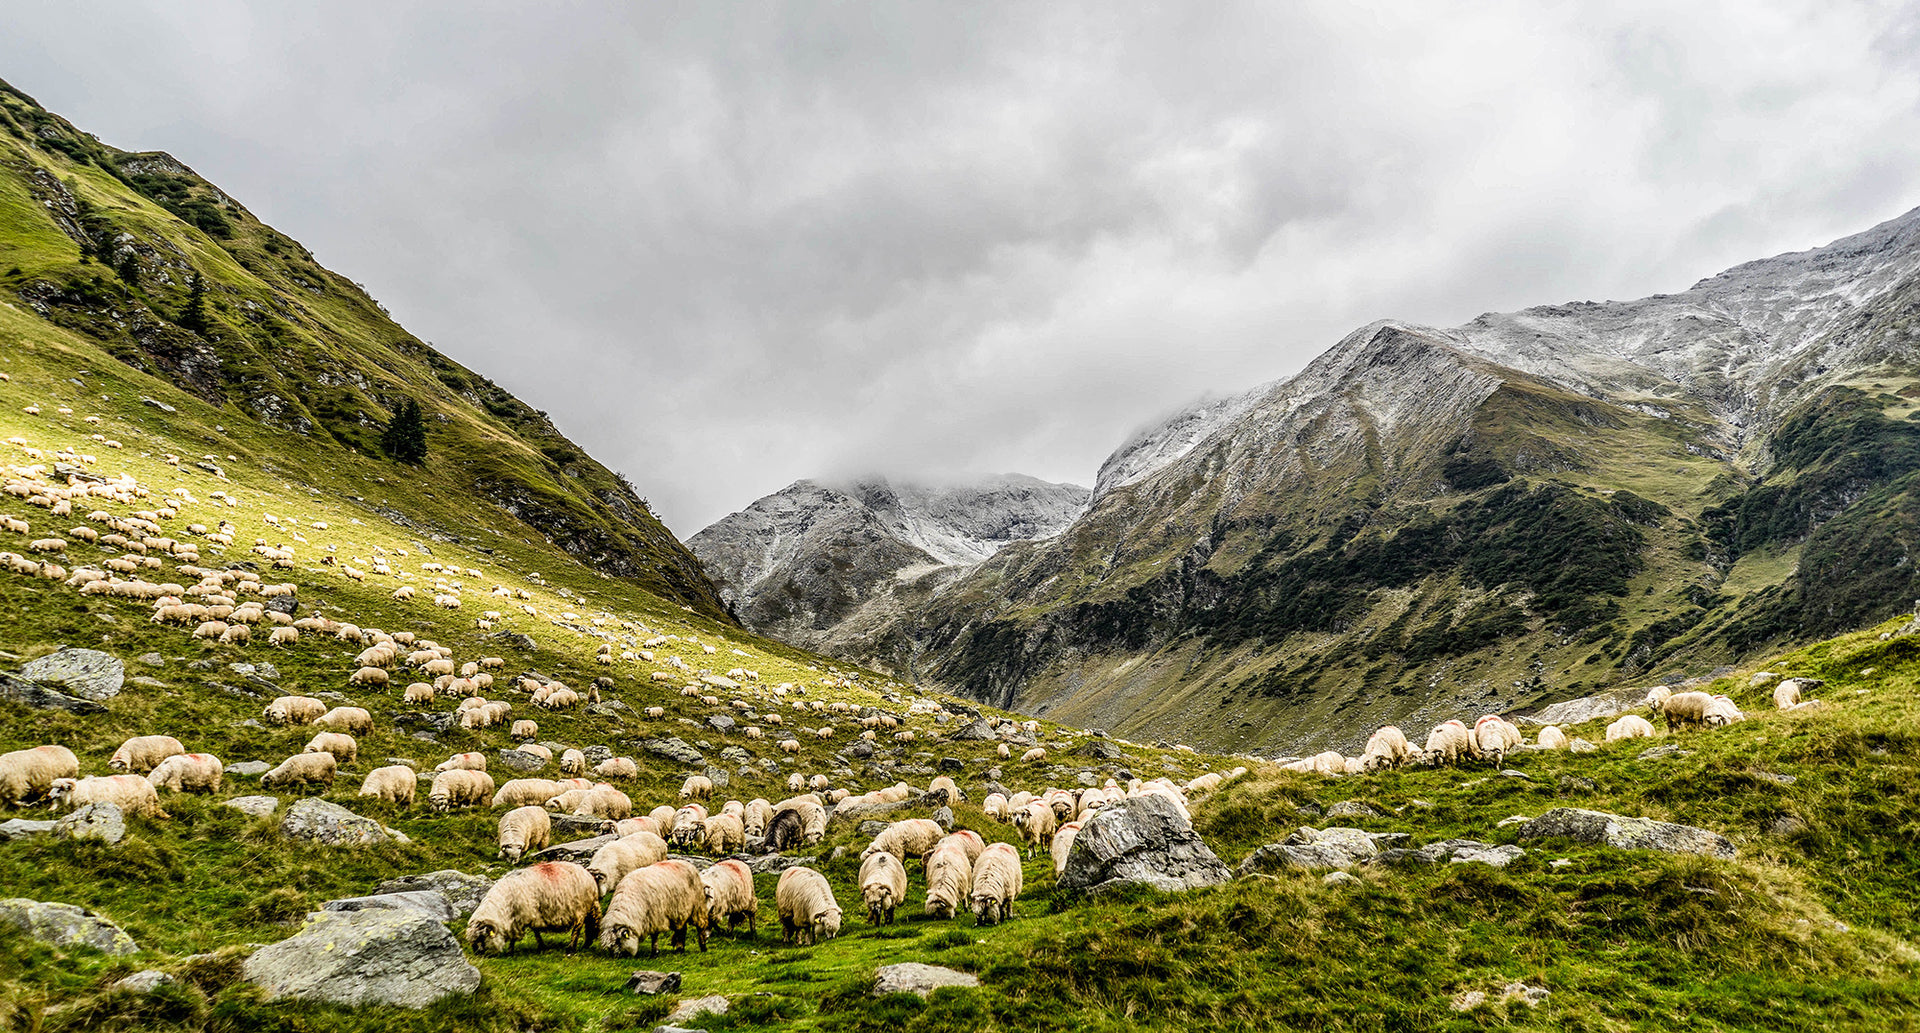 Why Merino wool and what makes it so special?